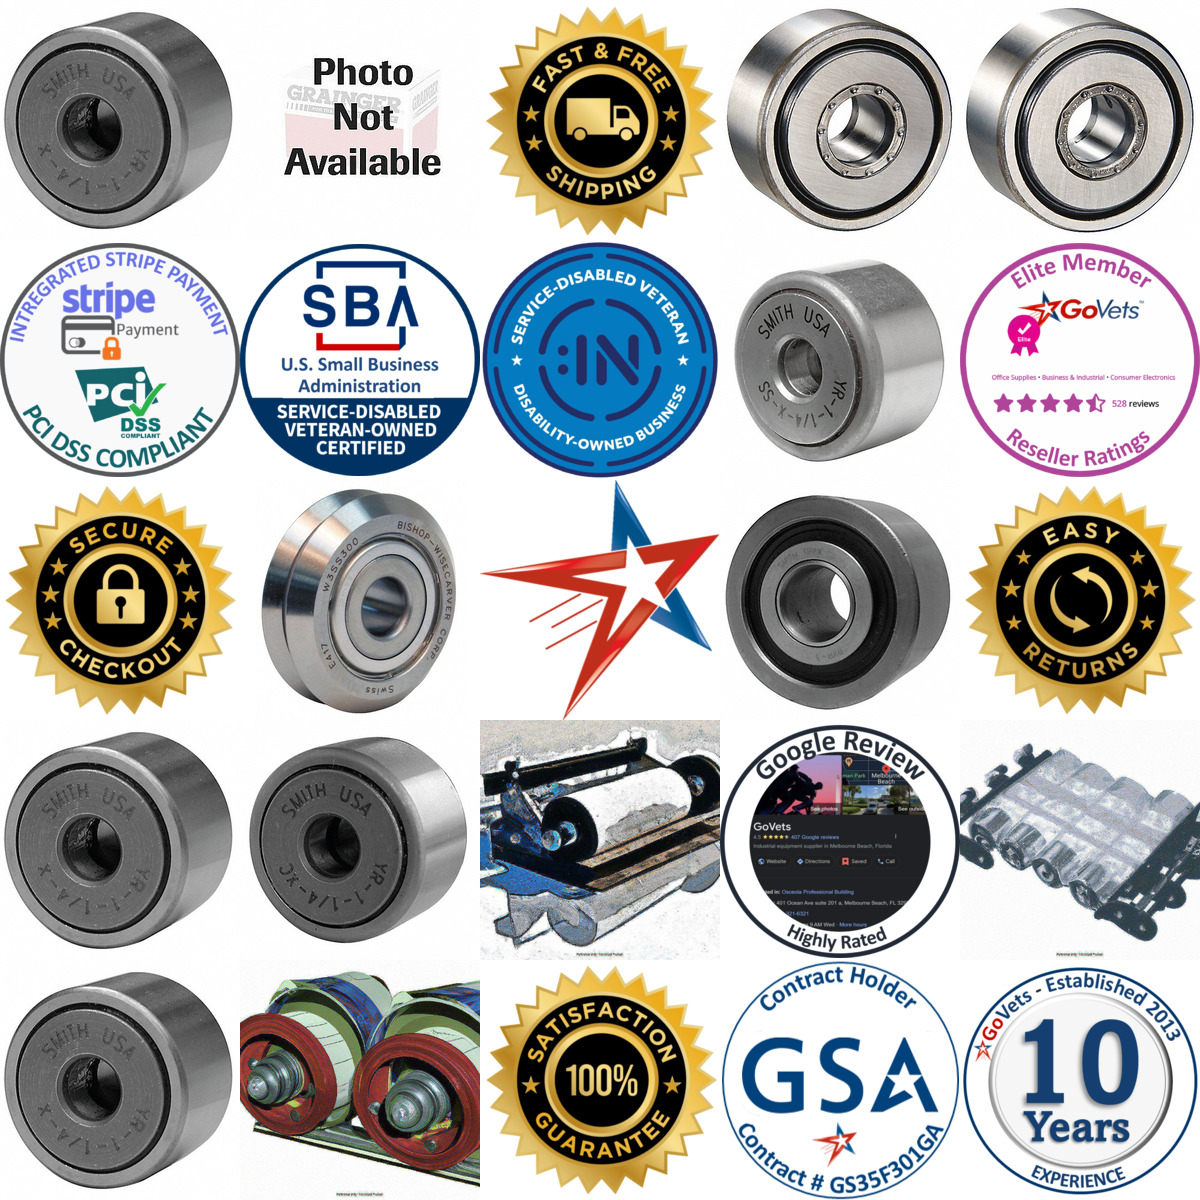 A selection of Yoke Rollers products on GoVets